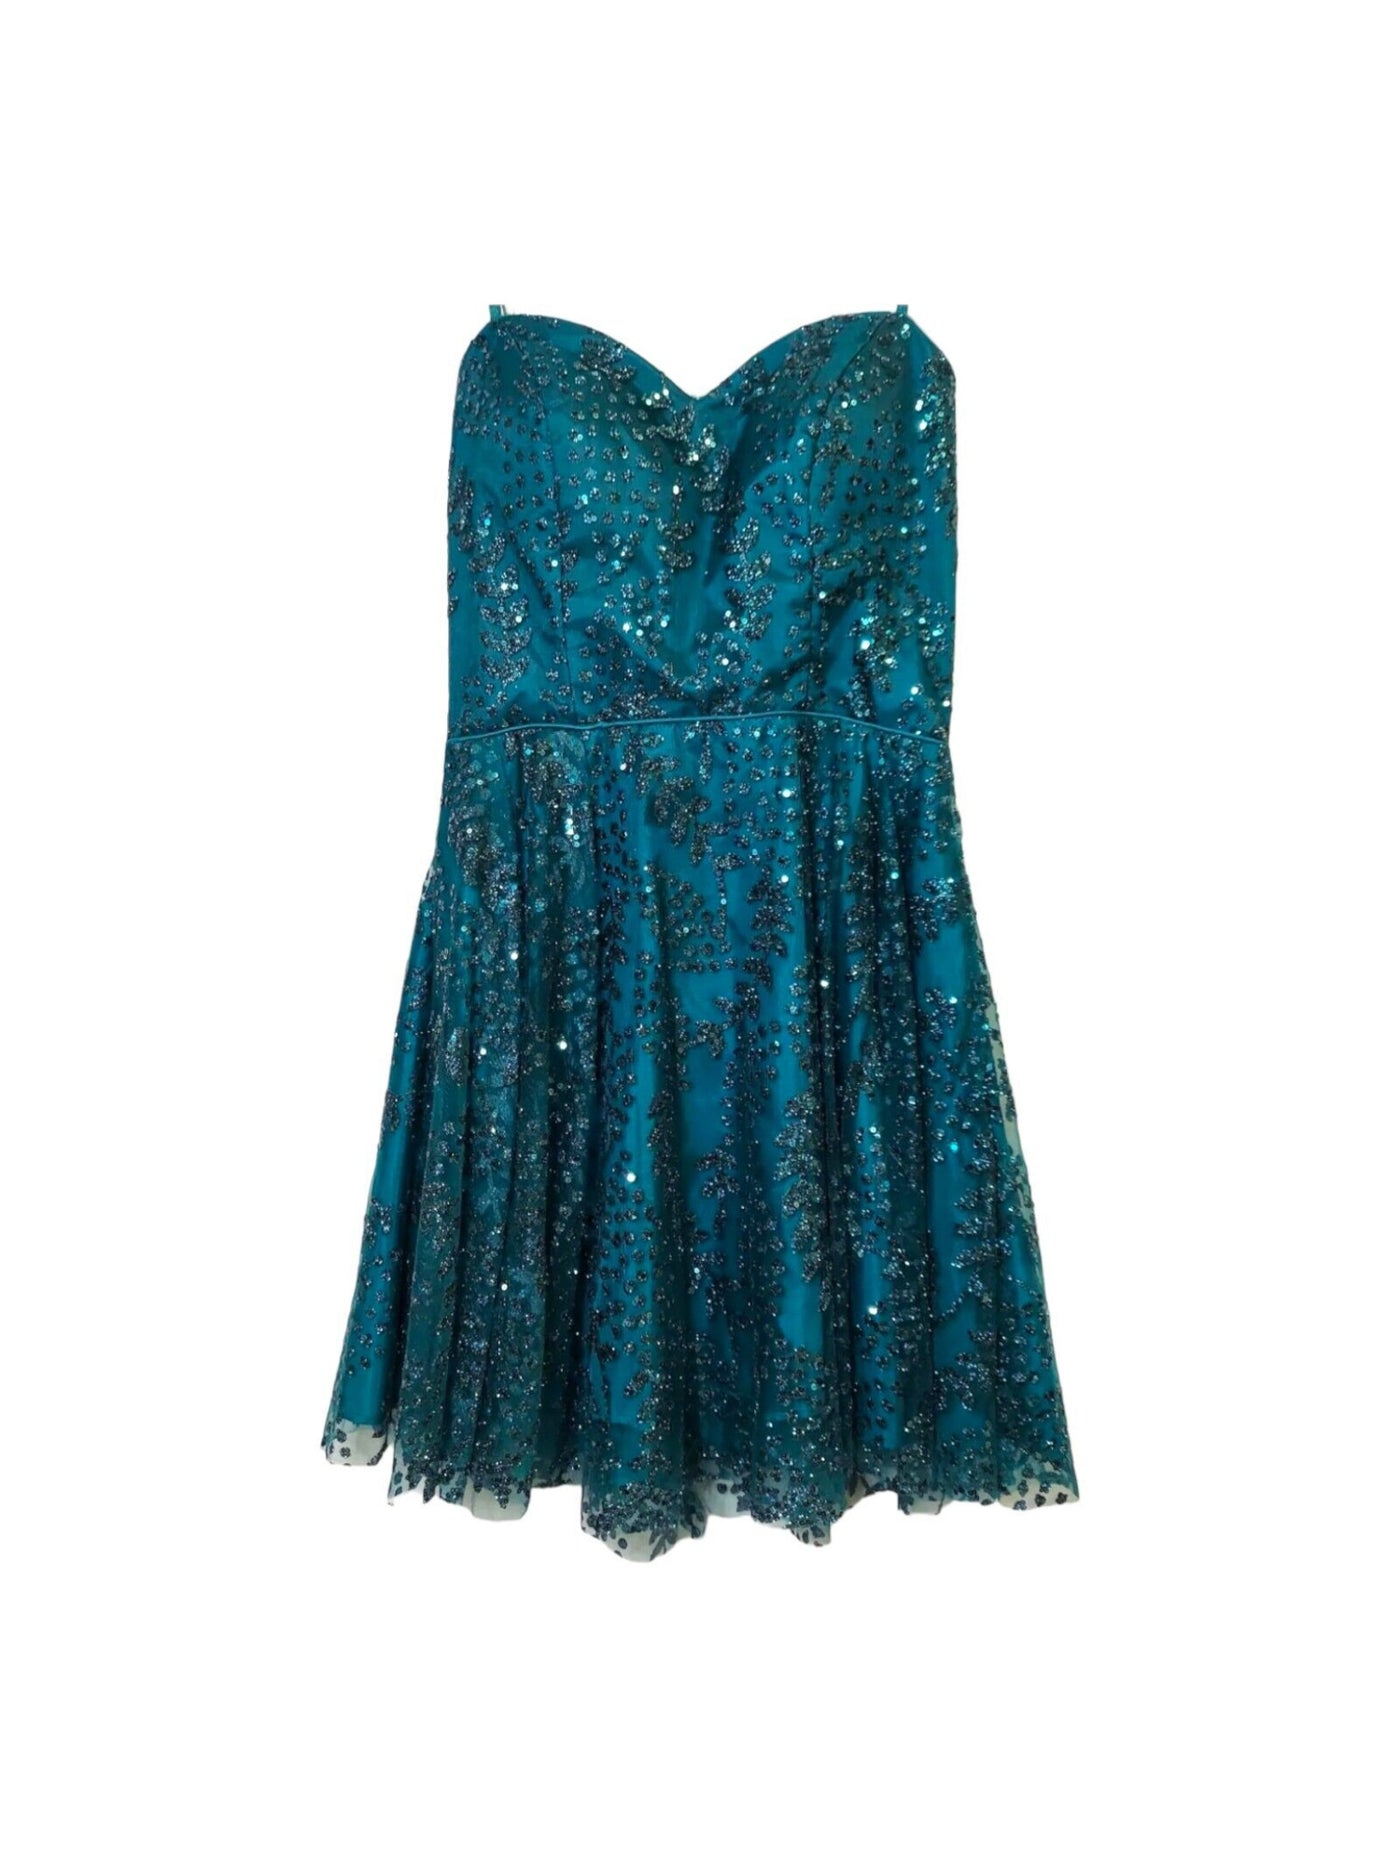 BLONDIE Womens Teal Sequined Glitter Lined Adjustable Zippered Sleeveless Round Neck Short Party Fit + Flare Dress Juniors 15